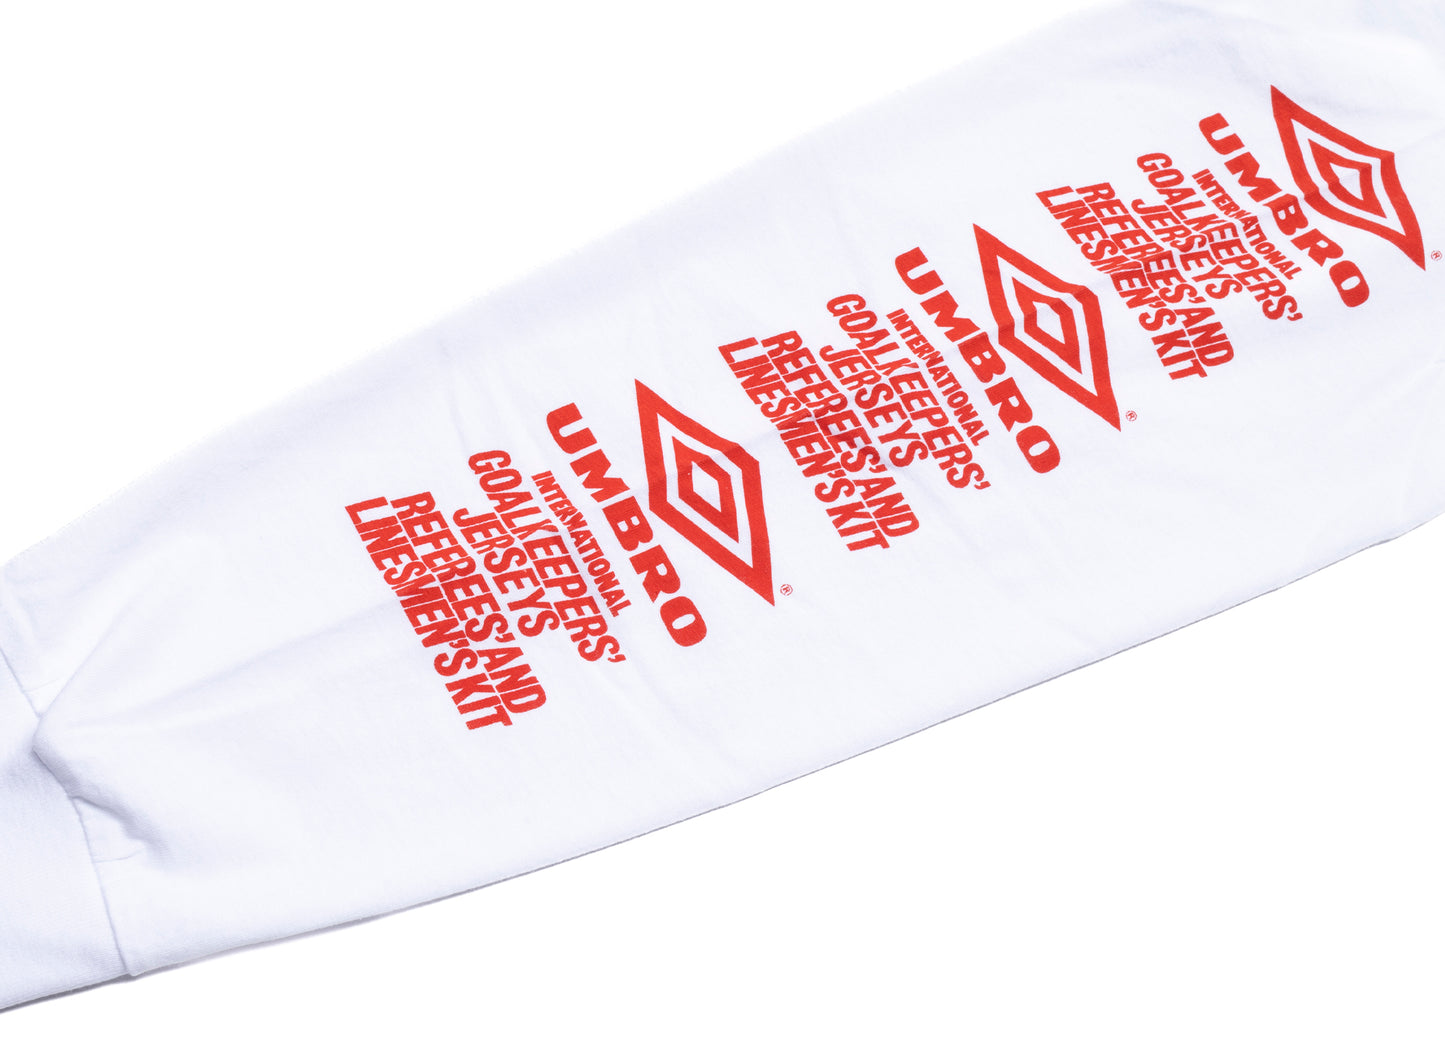 Umbro Penalty Culture Graphic Long Sleeve in White xld